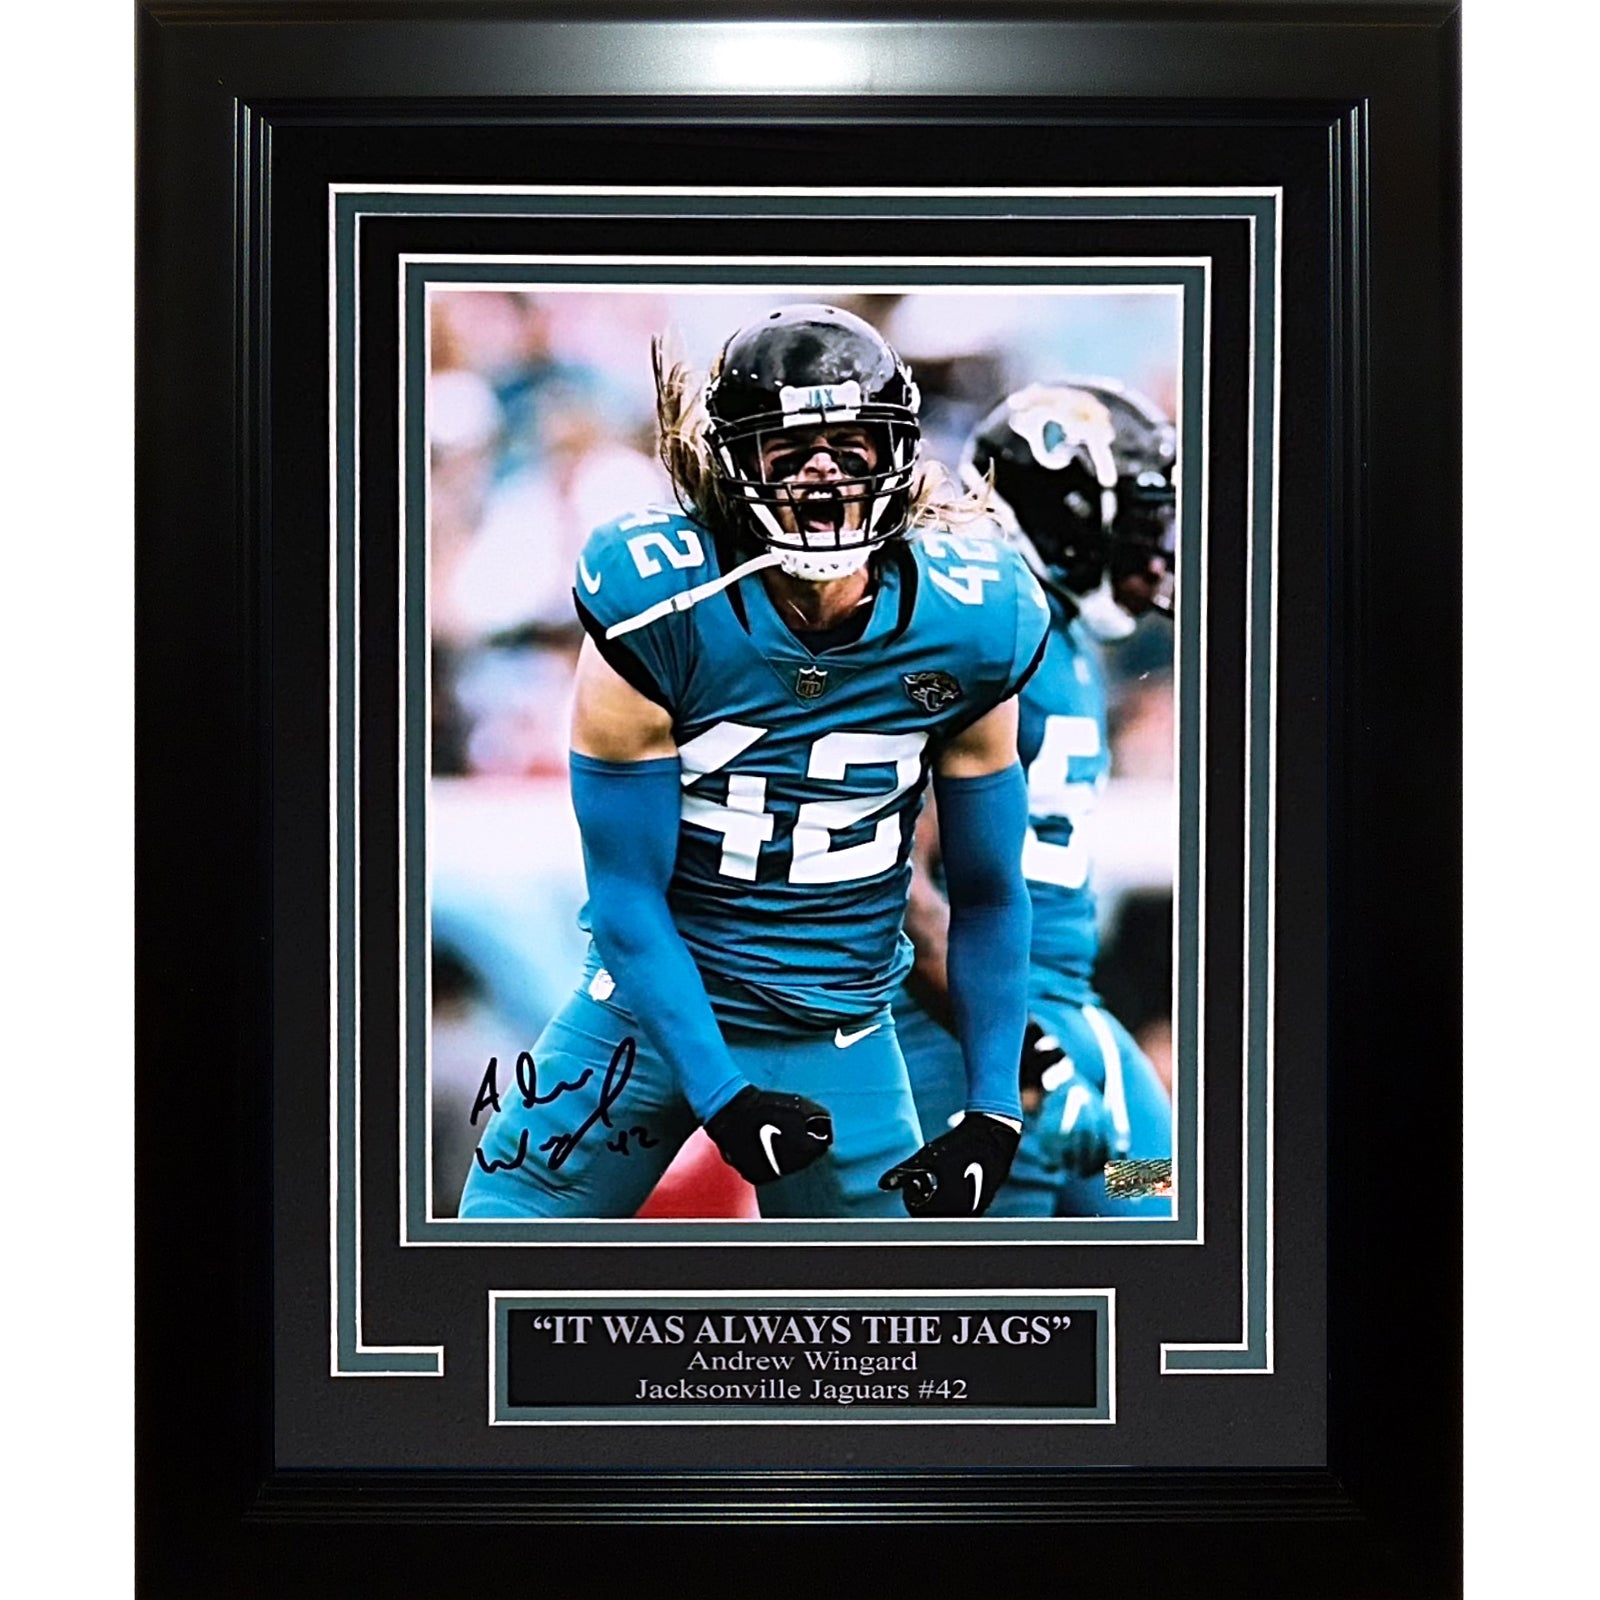 Andrew Wingard Autographed Jacksonville Jaguars Deluxe Framed 8x10 Photo 